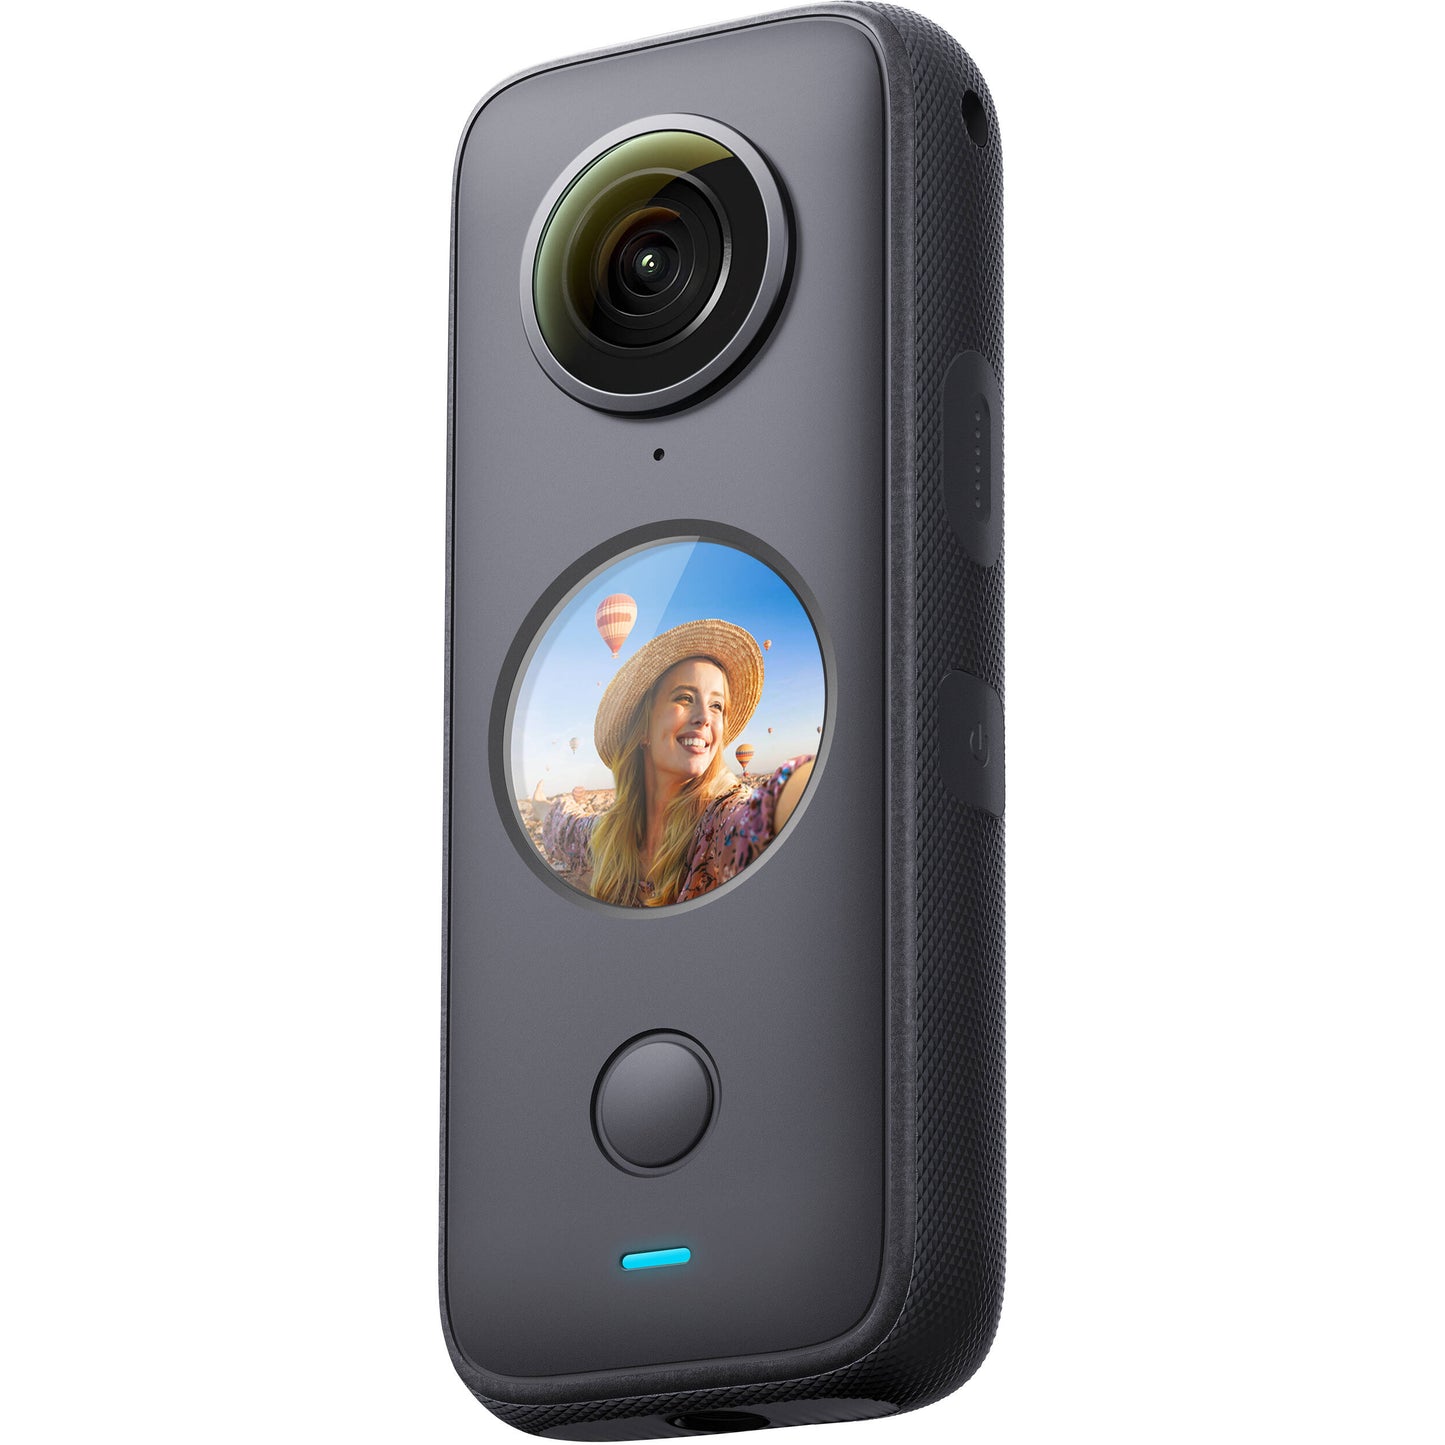 [Open Box] Insta360 ONE X2 Pocket 360 Camera Waterproof Steady Cam 5.7K 30fps with Stabilization, AI Editing, Deep Track, HDR Support, 4 Mics